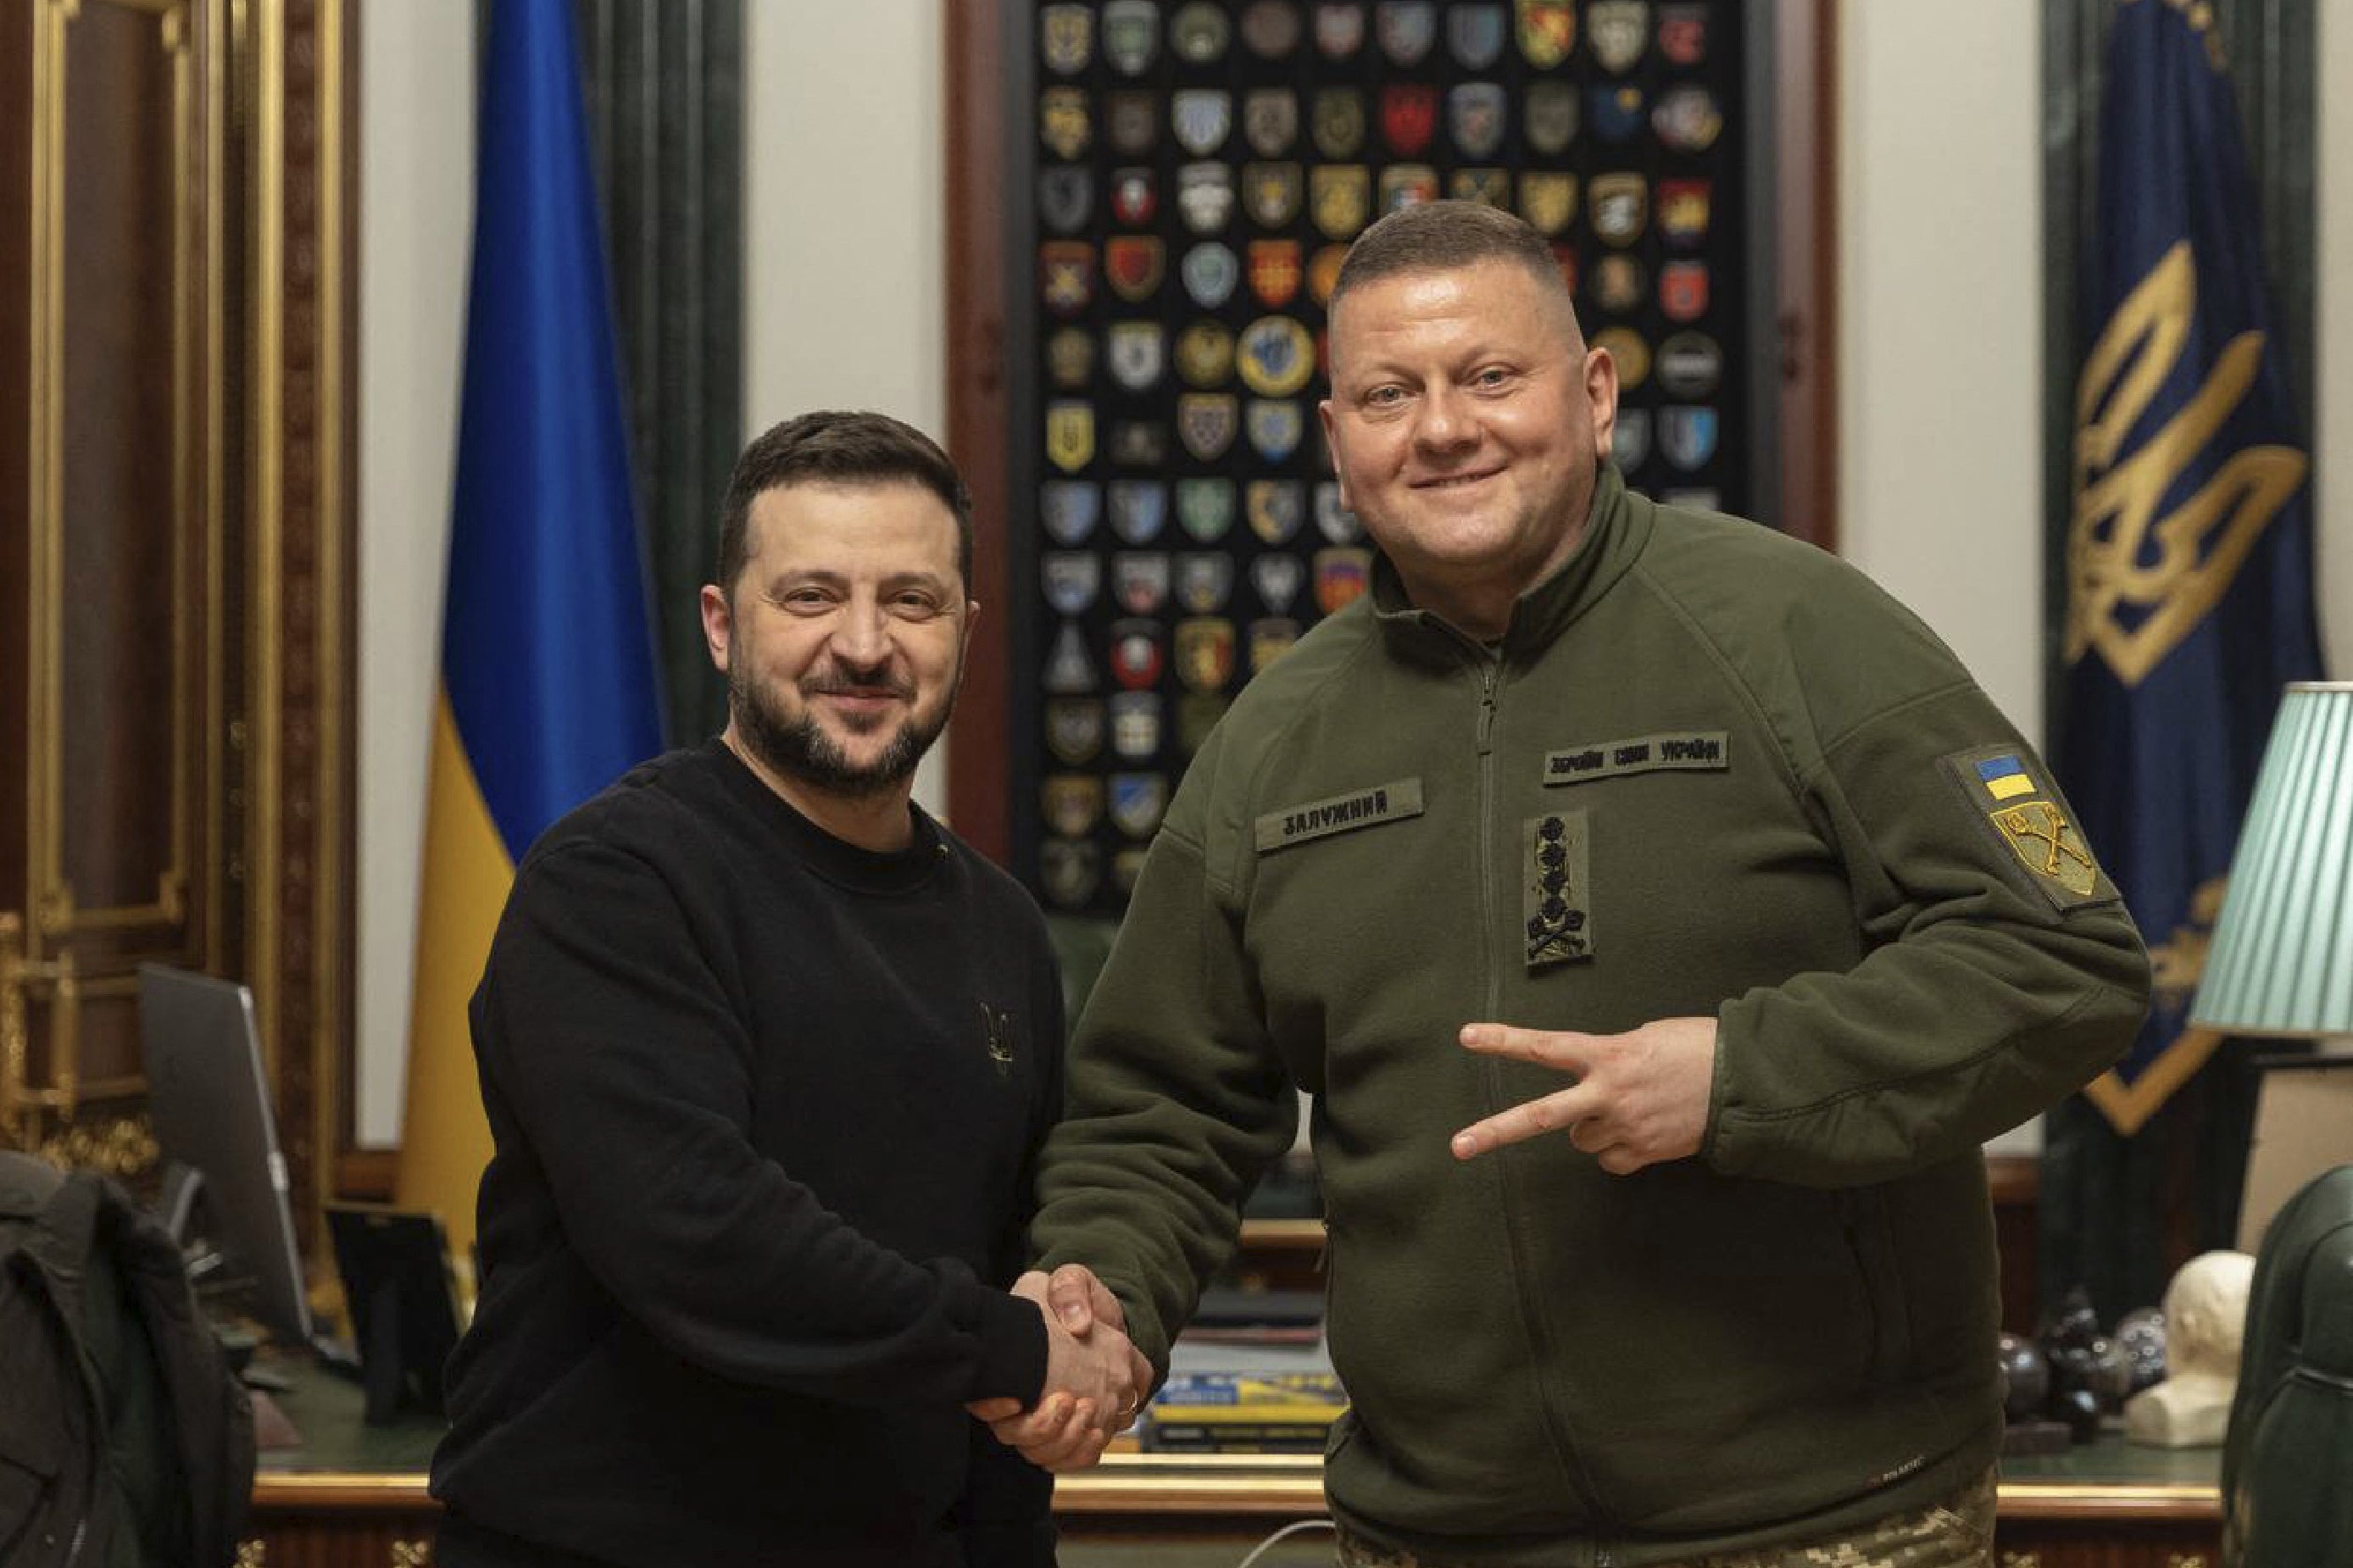 Volodymyr Zelensky, left, and Valerii Zaluzhnyi present a united front at a meeting in Kyiv last week despite reports of tensions between the two men